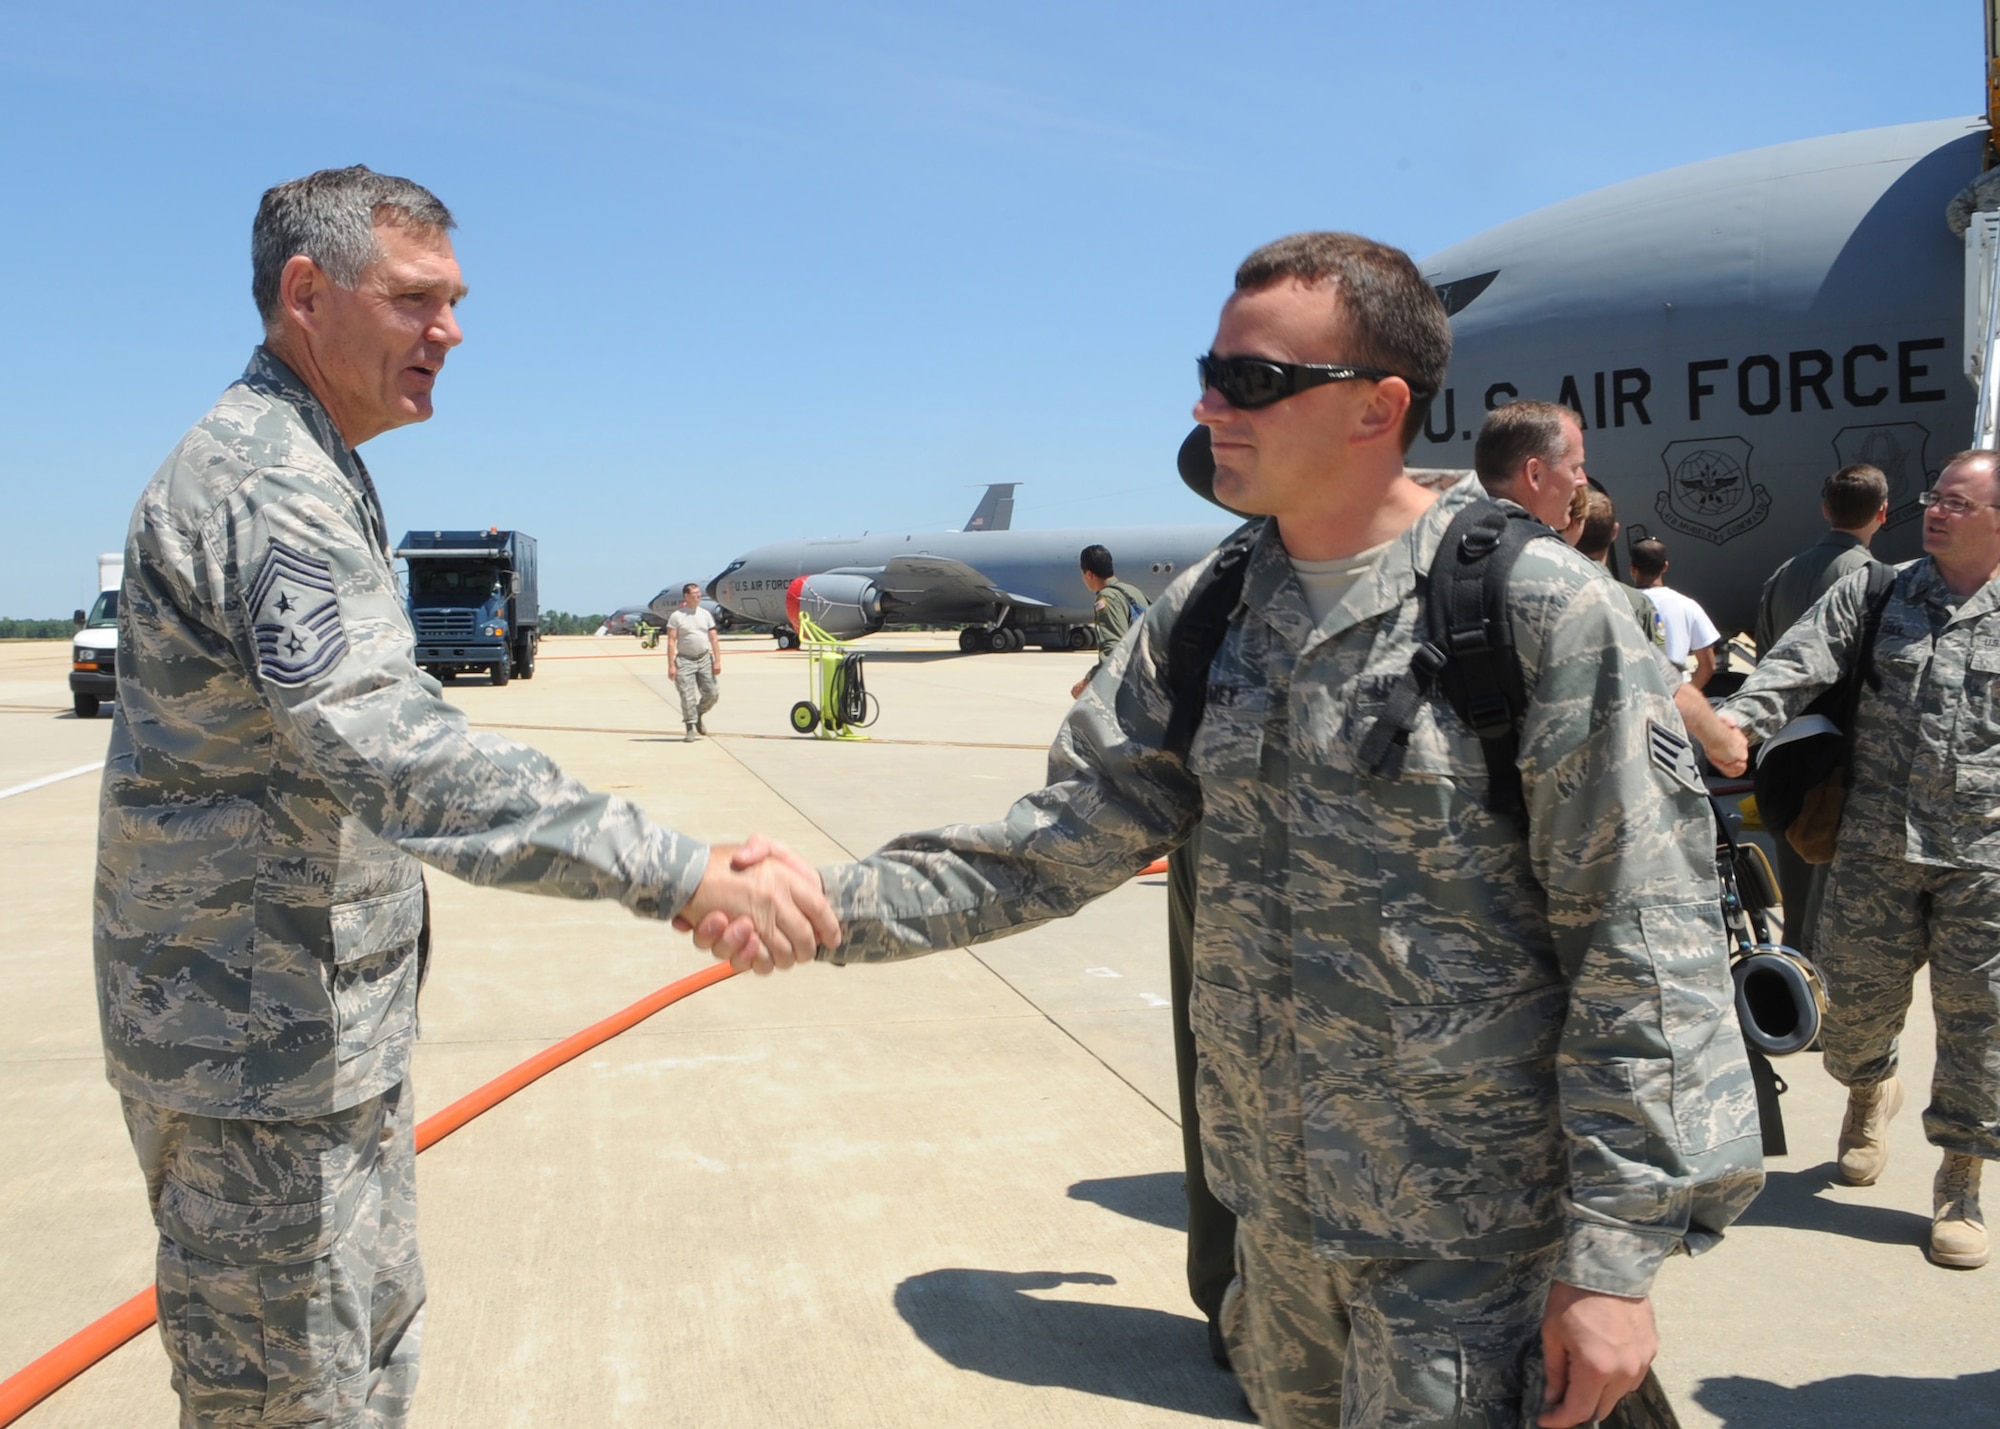 459th Air Refueling Wing Comand Chief Master Sgt. Clifford Van Yahres welcomes Airmen from the 459th ARW after returning from a deployment to Southwest Asia, here July 3. (U.S. Air Force photo/Staff Sgt. Melissa Stonecipher)